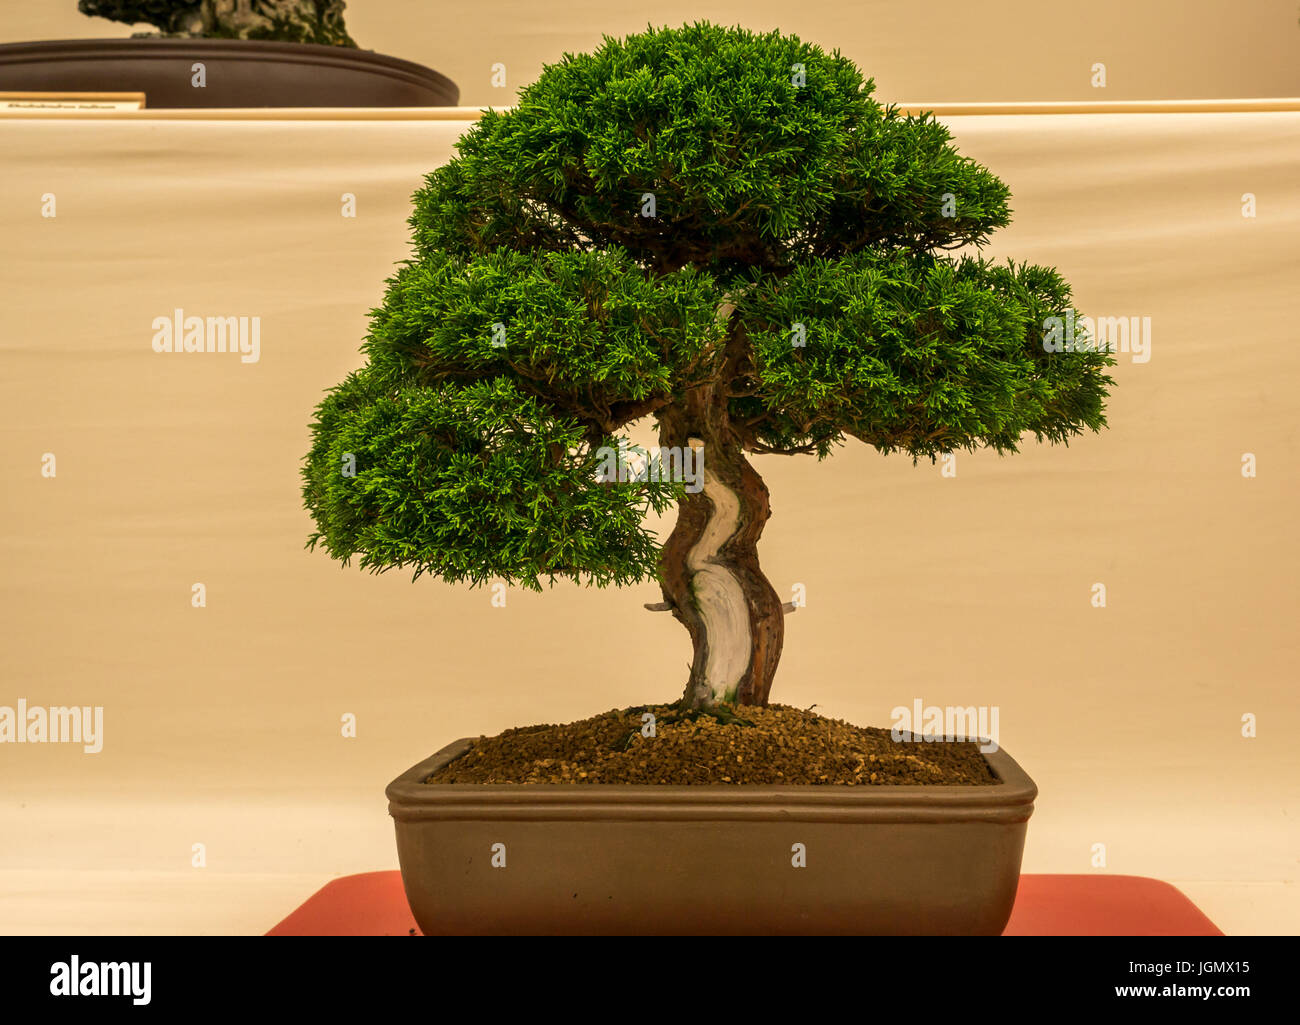 446 Bonzai Tree Isolated Royalty-Free Images, Stock Photos & Pictures